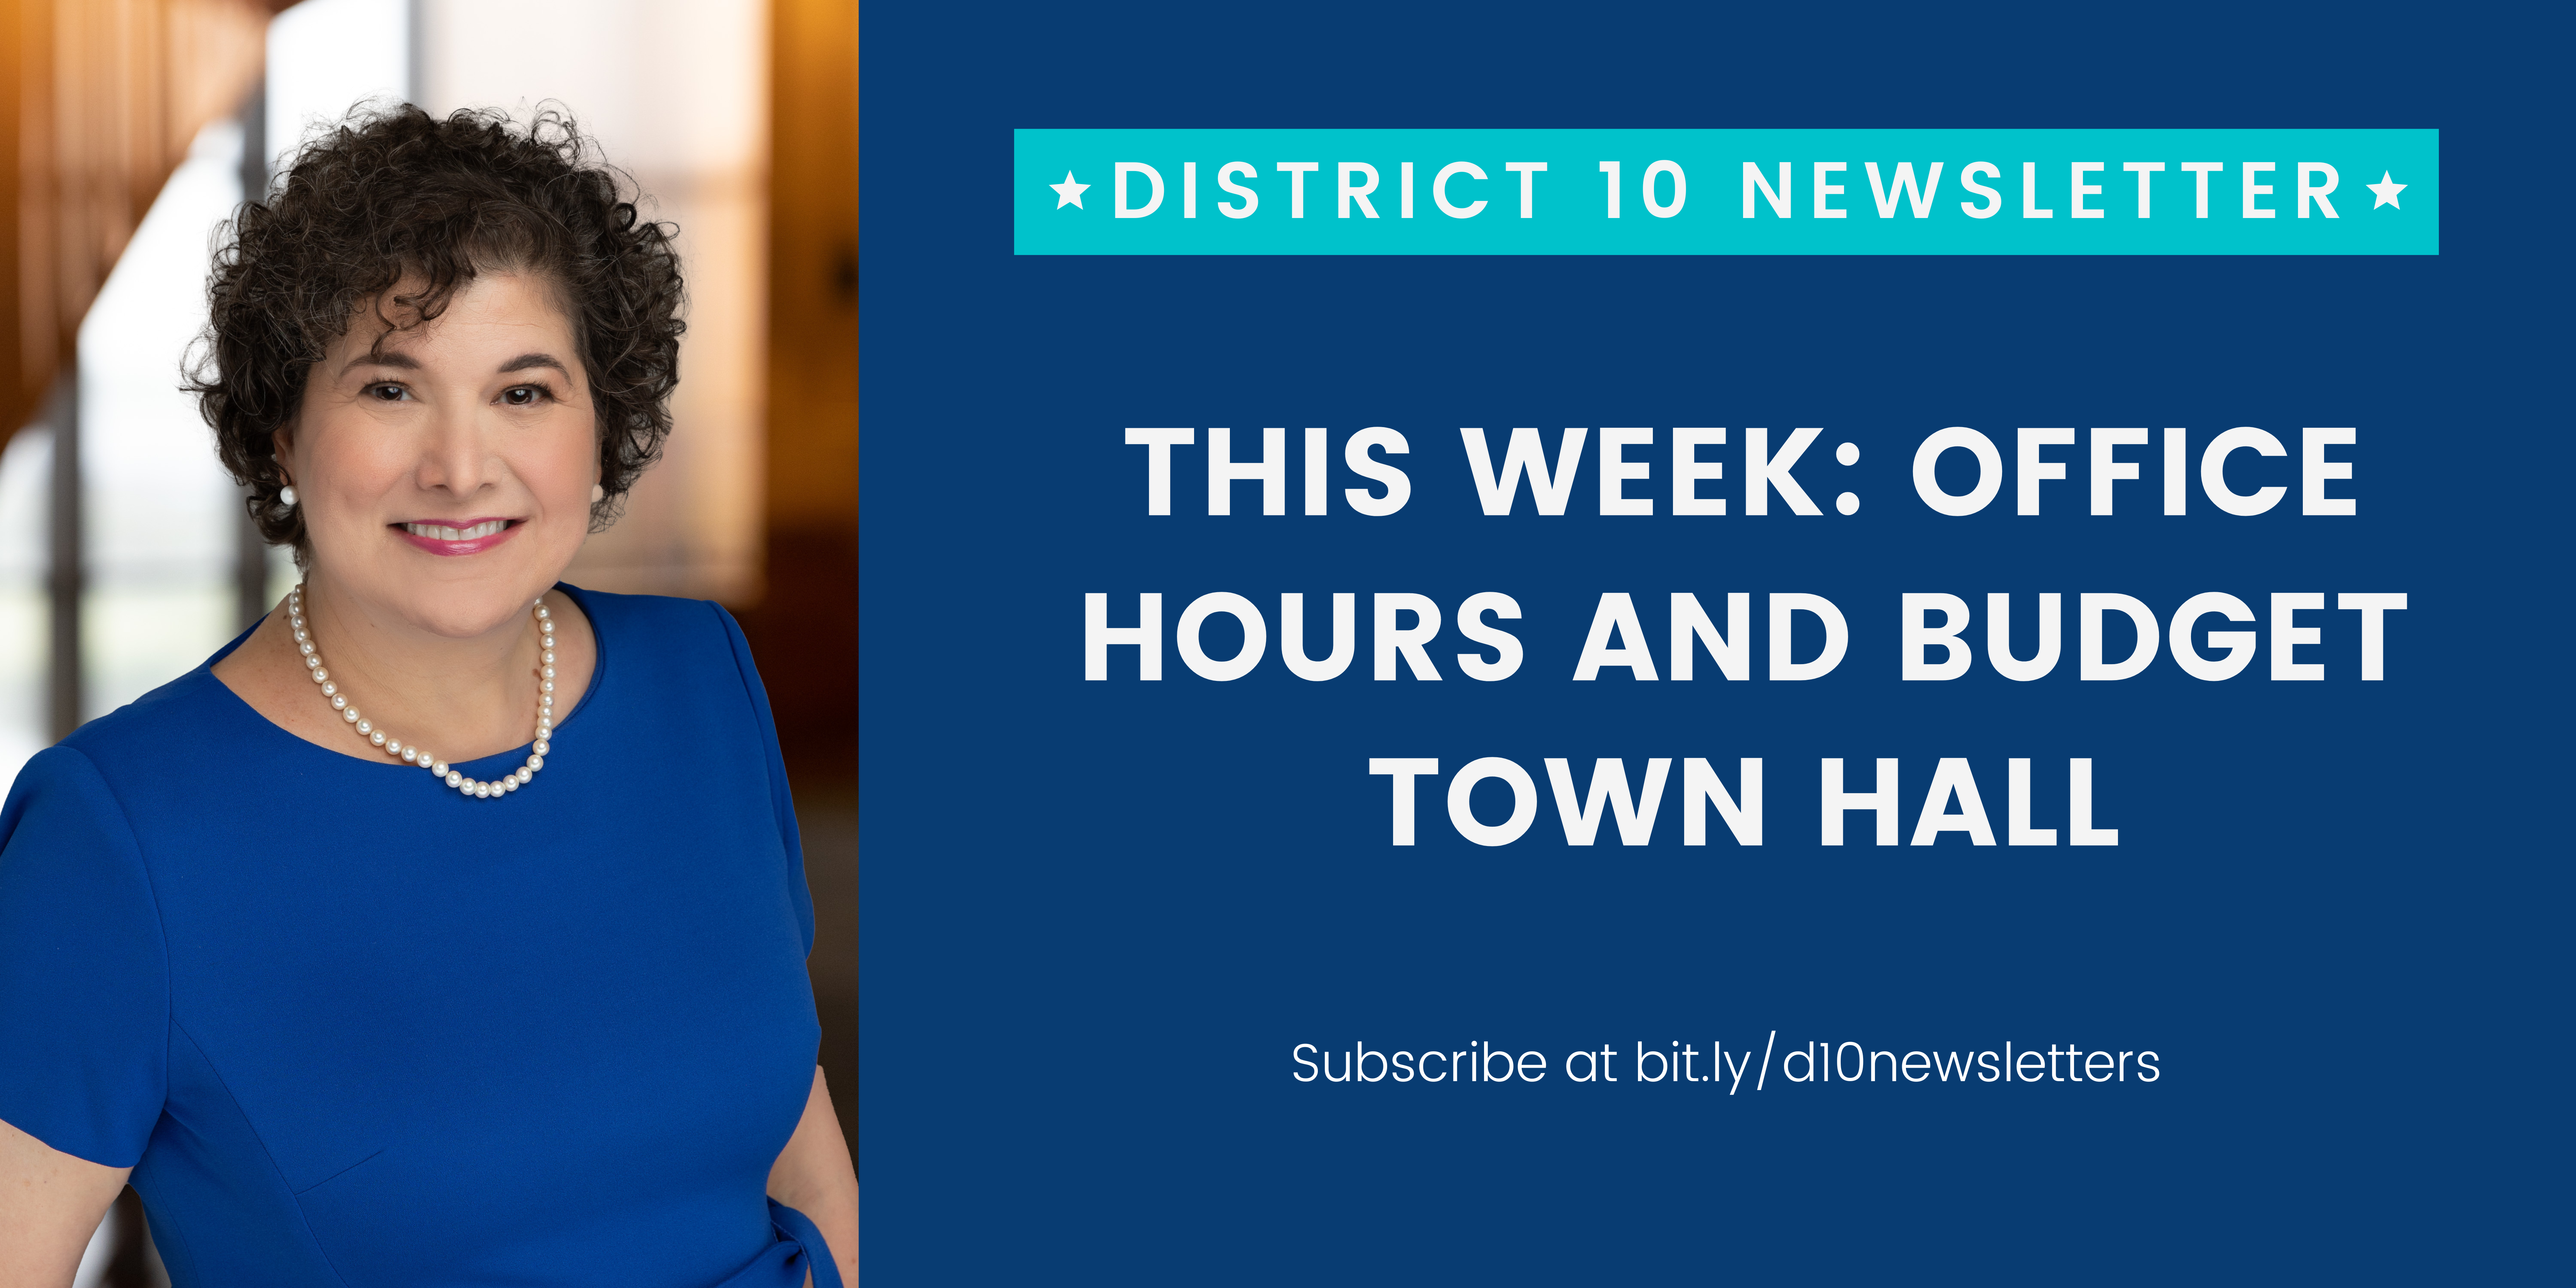 This Week: Office Hours and Budget Town Hall